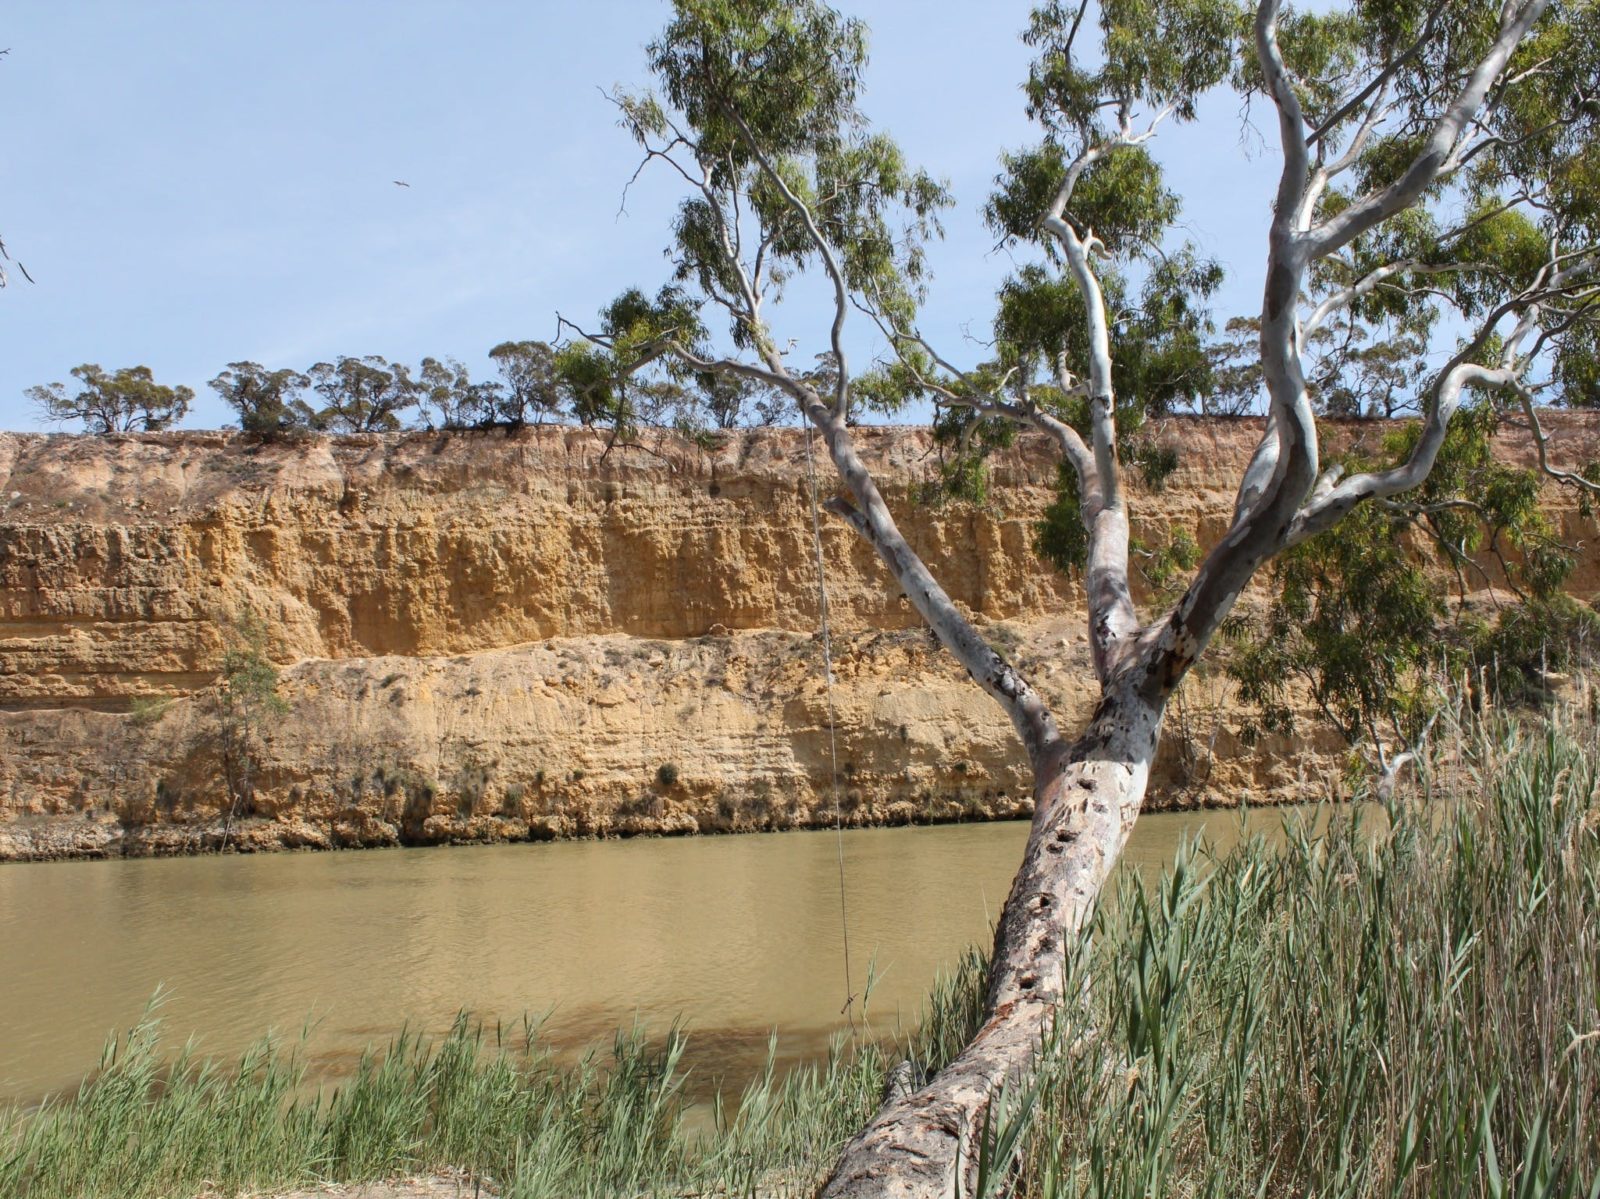 Maize Island Lagoon Conservation Park, on the banks of the Murray River.